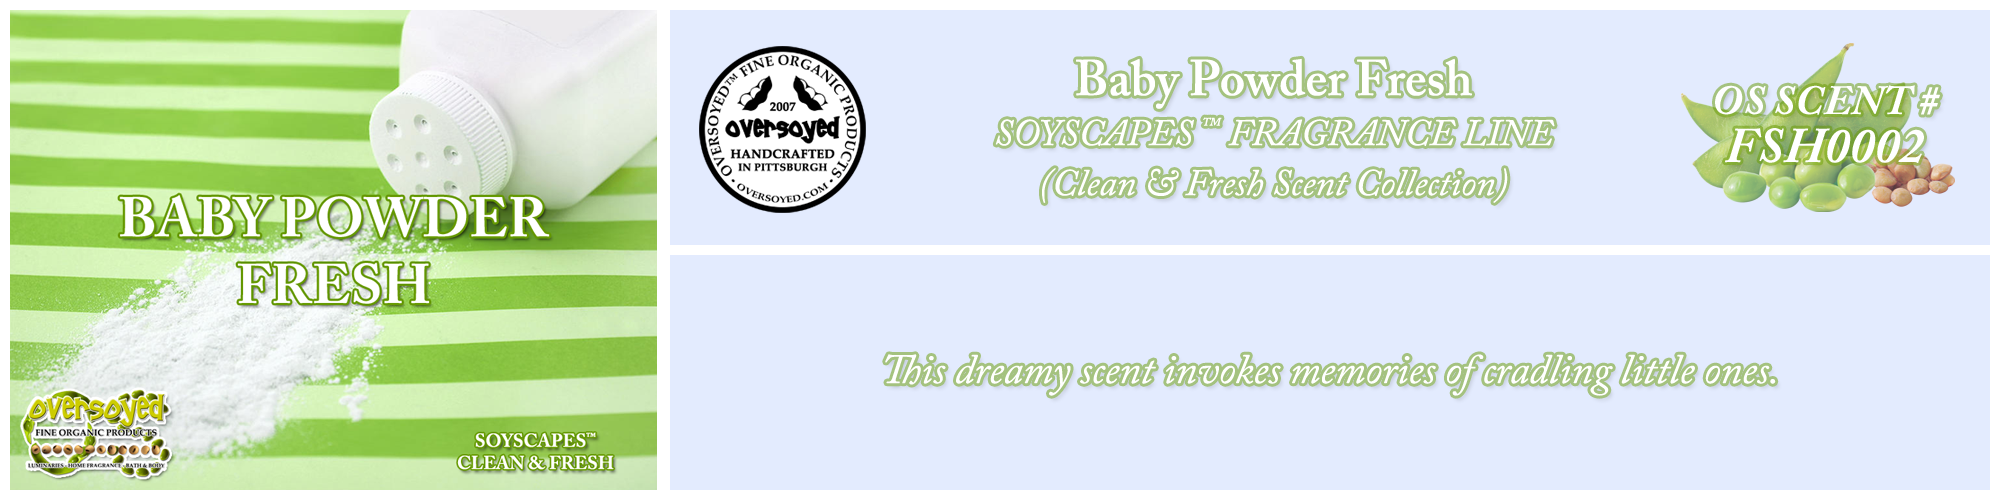 Baby Powder Fresh Handcrafted Products Collection